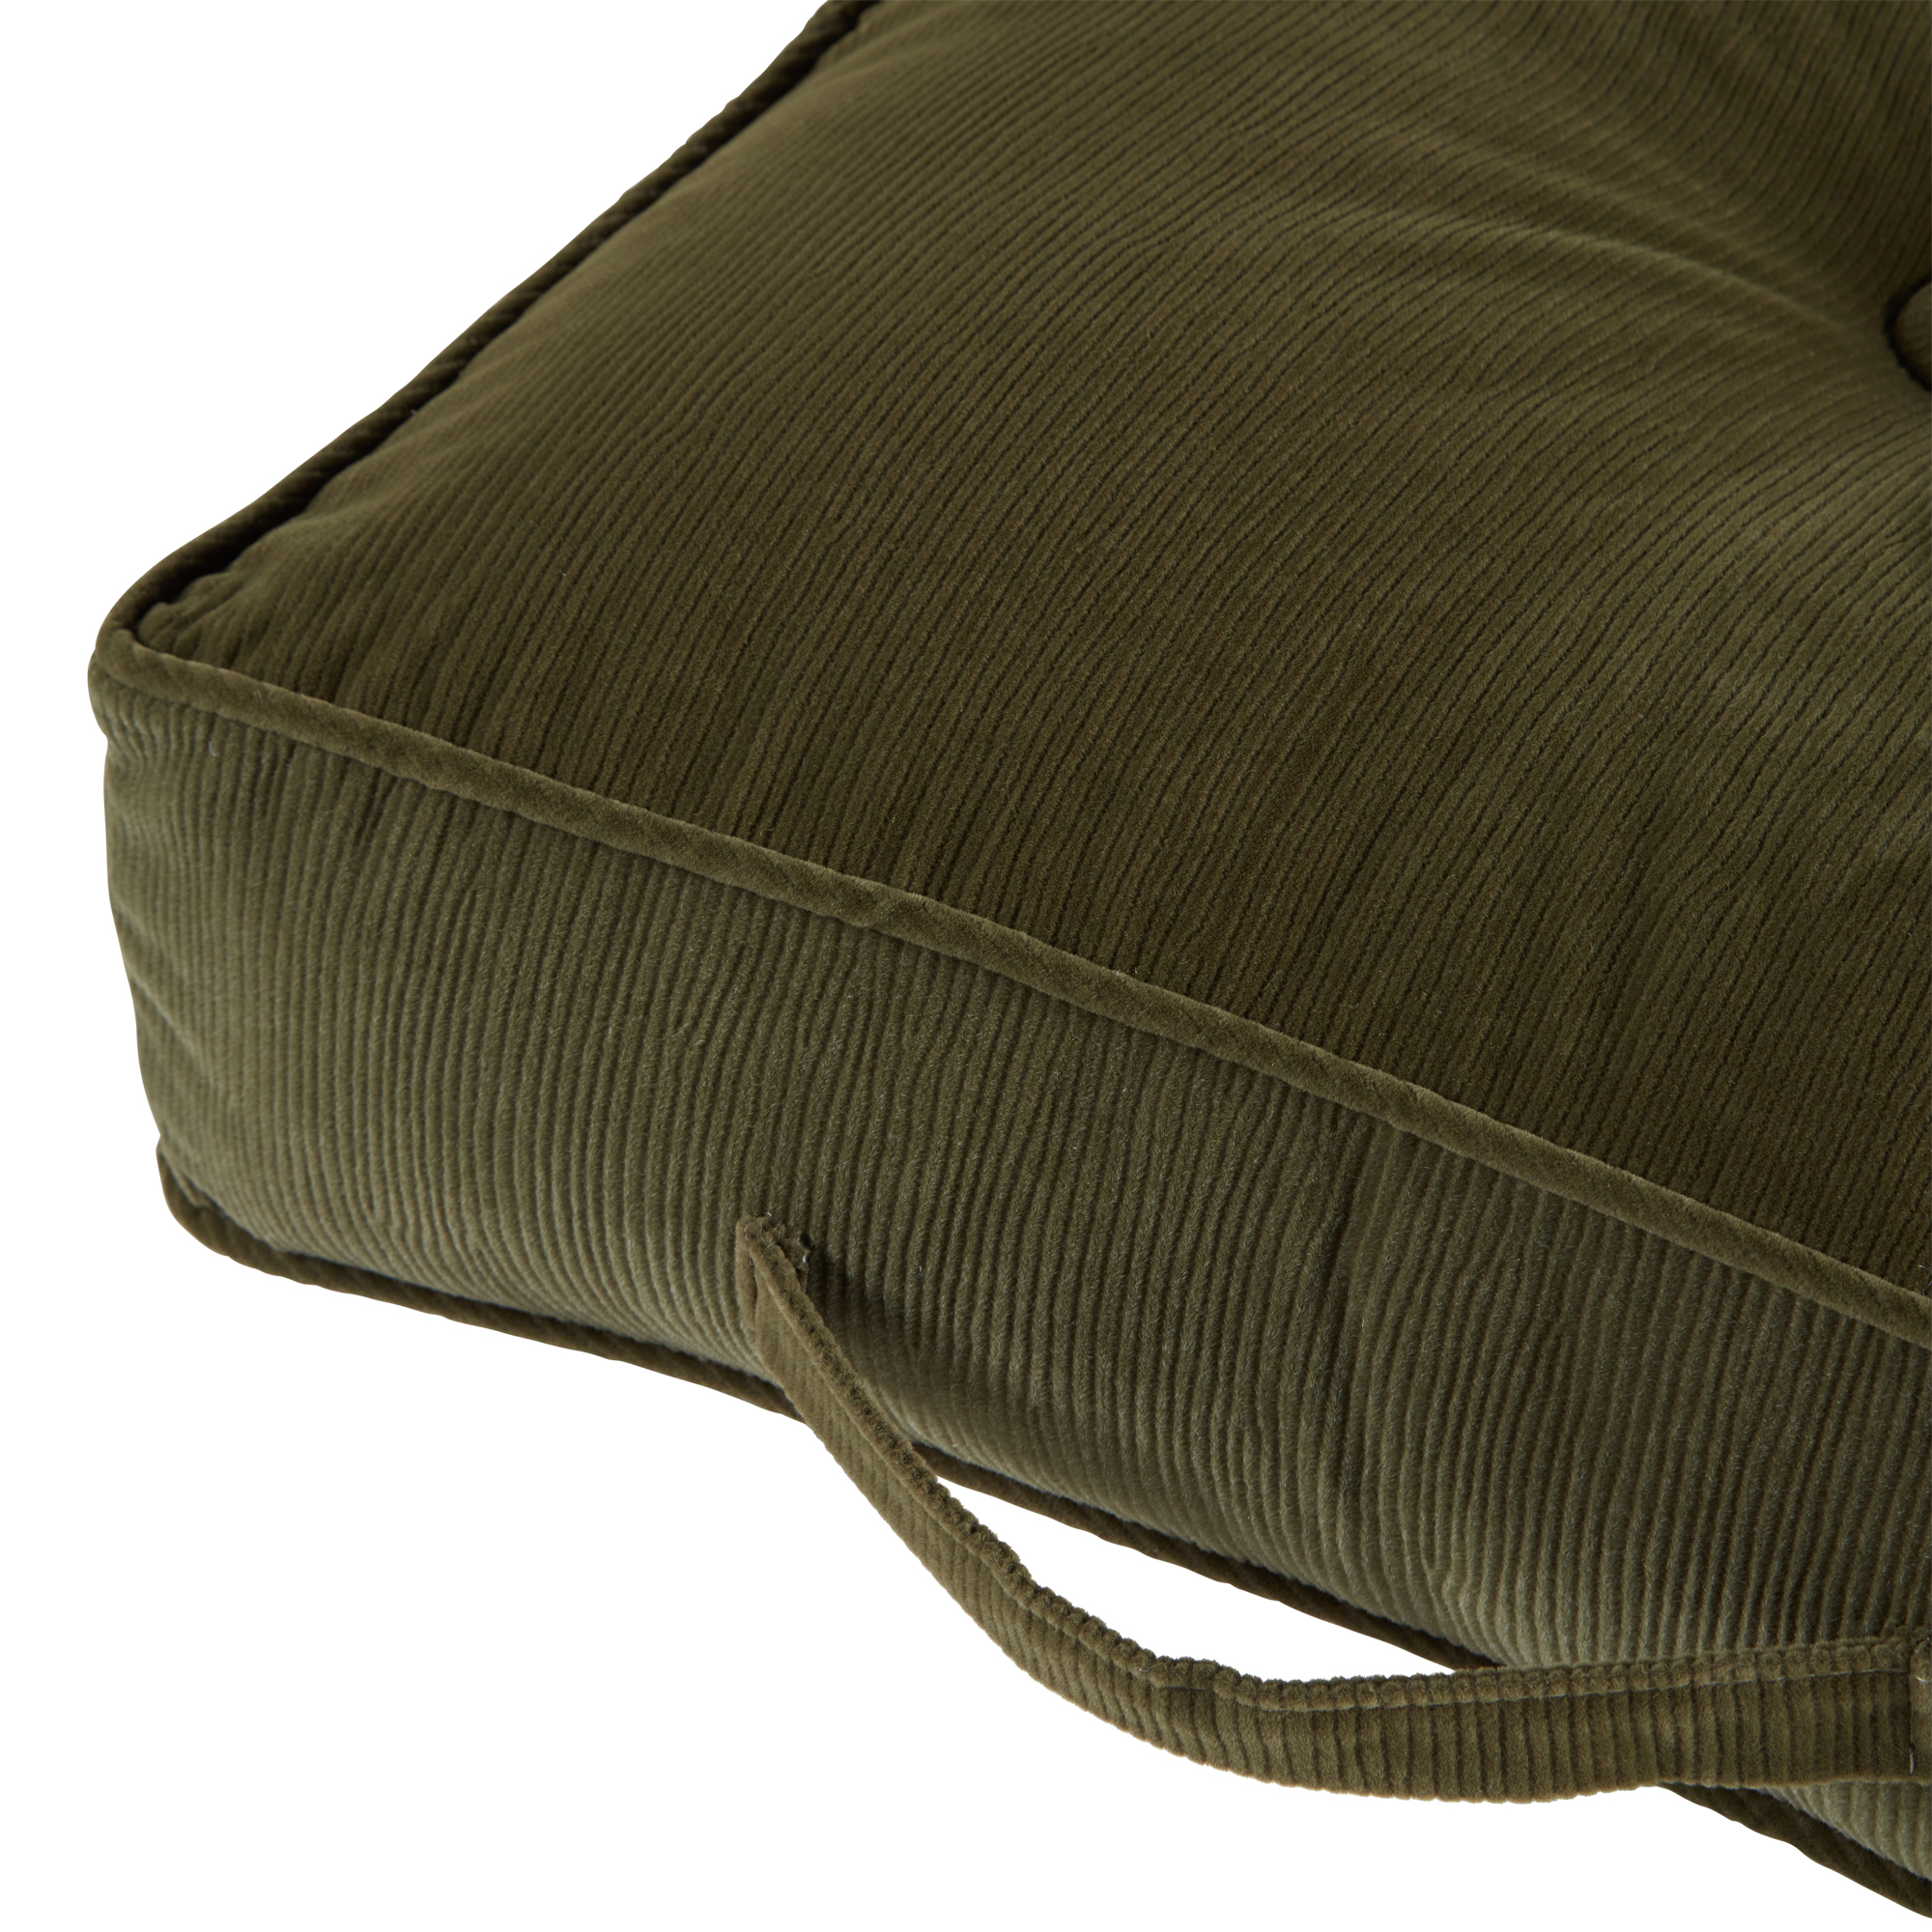 Omaha Sage Microfiber 21 in. Square Floor Pillow - image 3 of 6